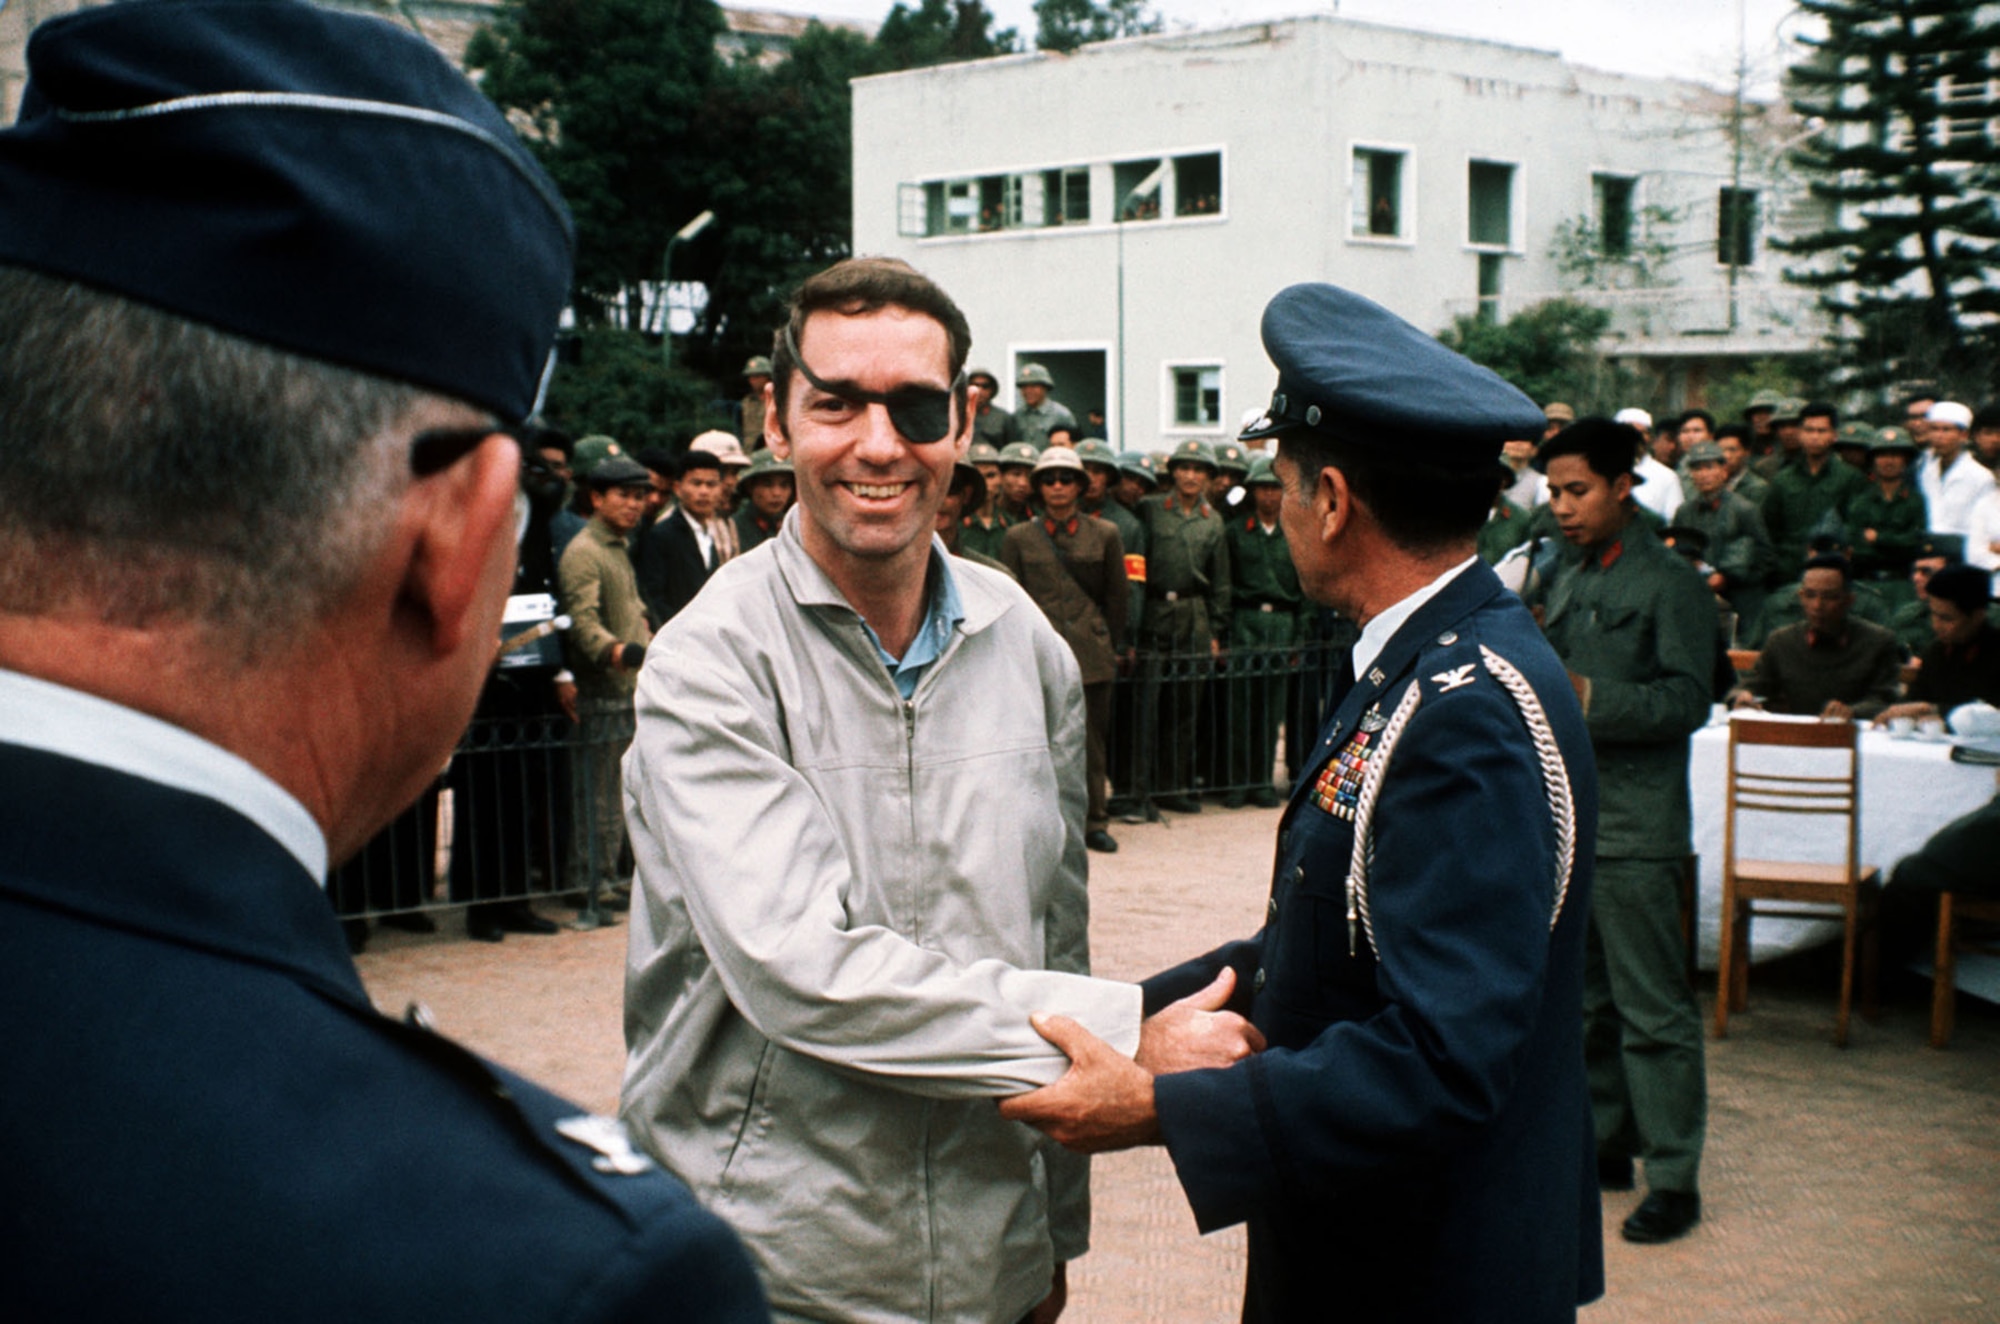 USAF Lt. Col. Lewis Shattuck is greeted at Gia Lam Airport. (U.S. Air Force photo)